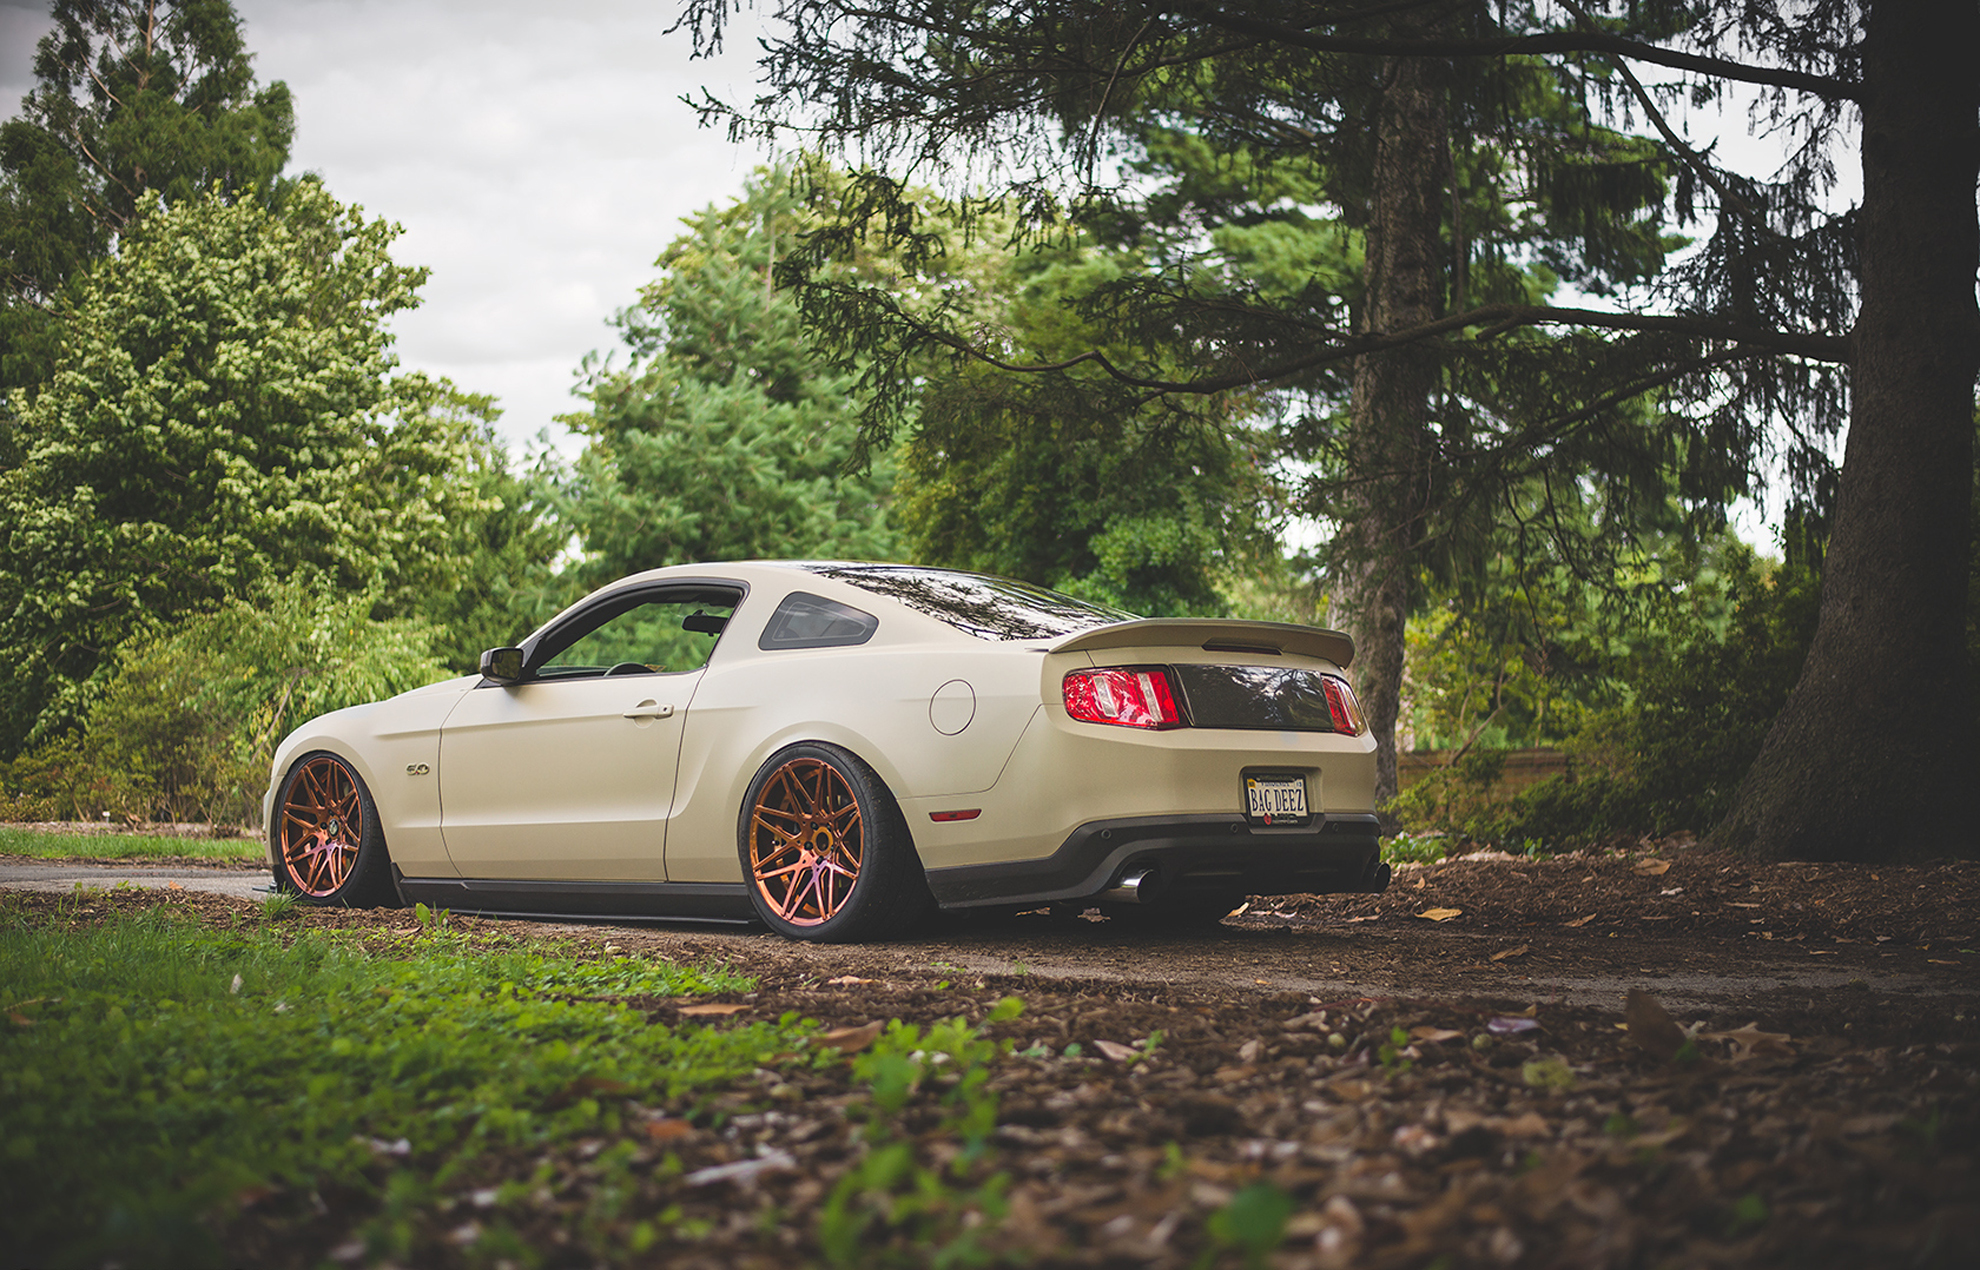 tuning, Low Ride, Muscle Cars, Shelby, Shelby GT, Car Wallpaper